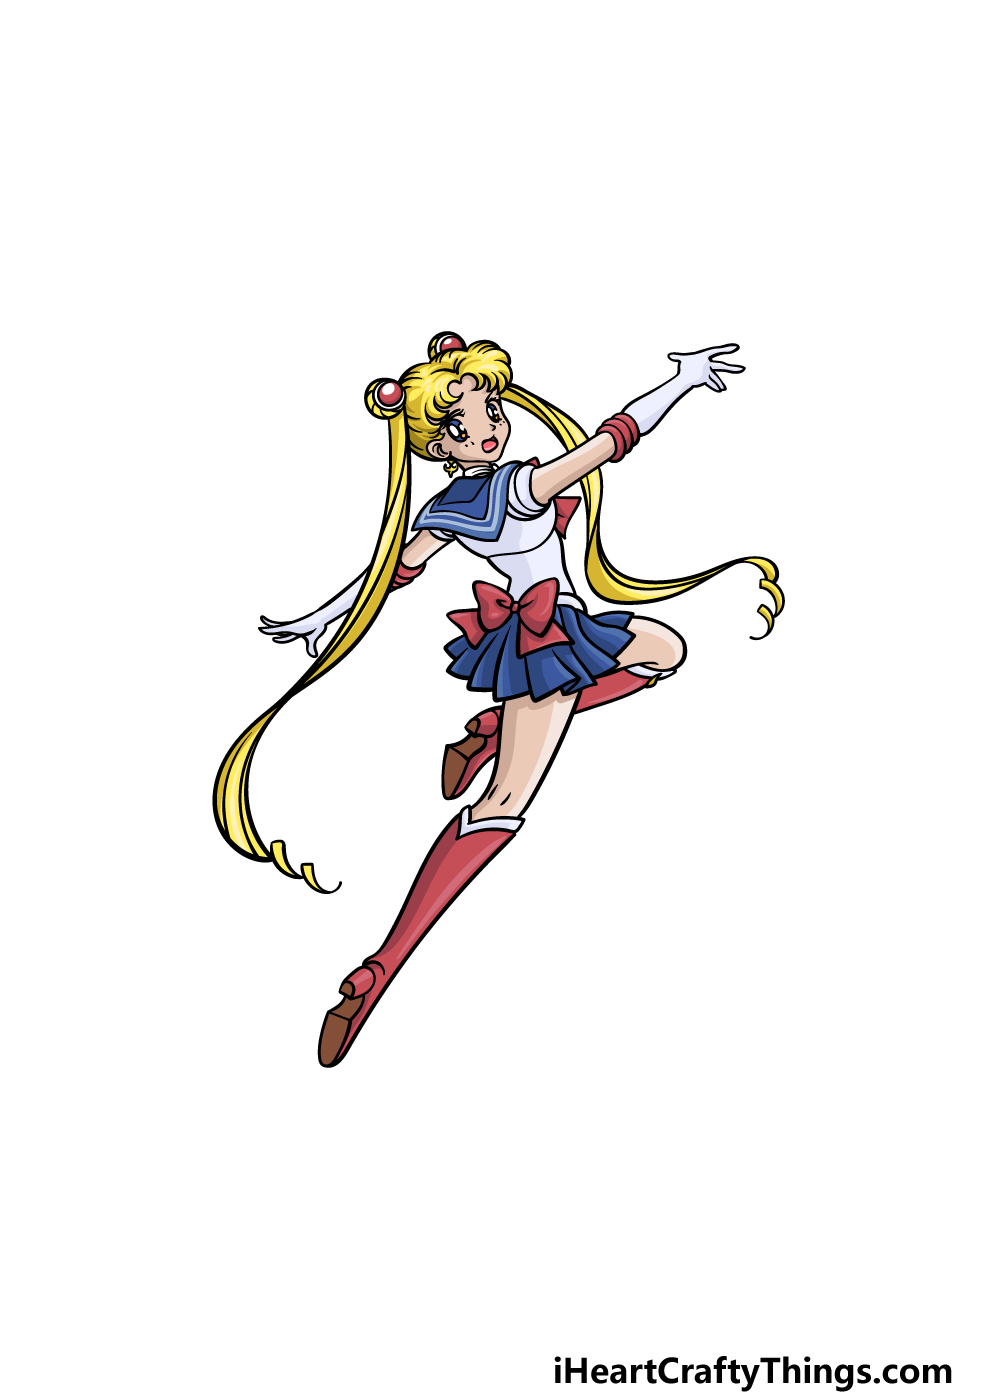 Sailor Moon Drawing - How To Draw Sailor Moon Step By Step